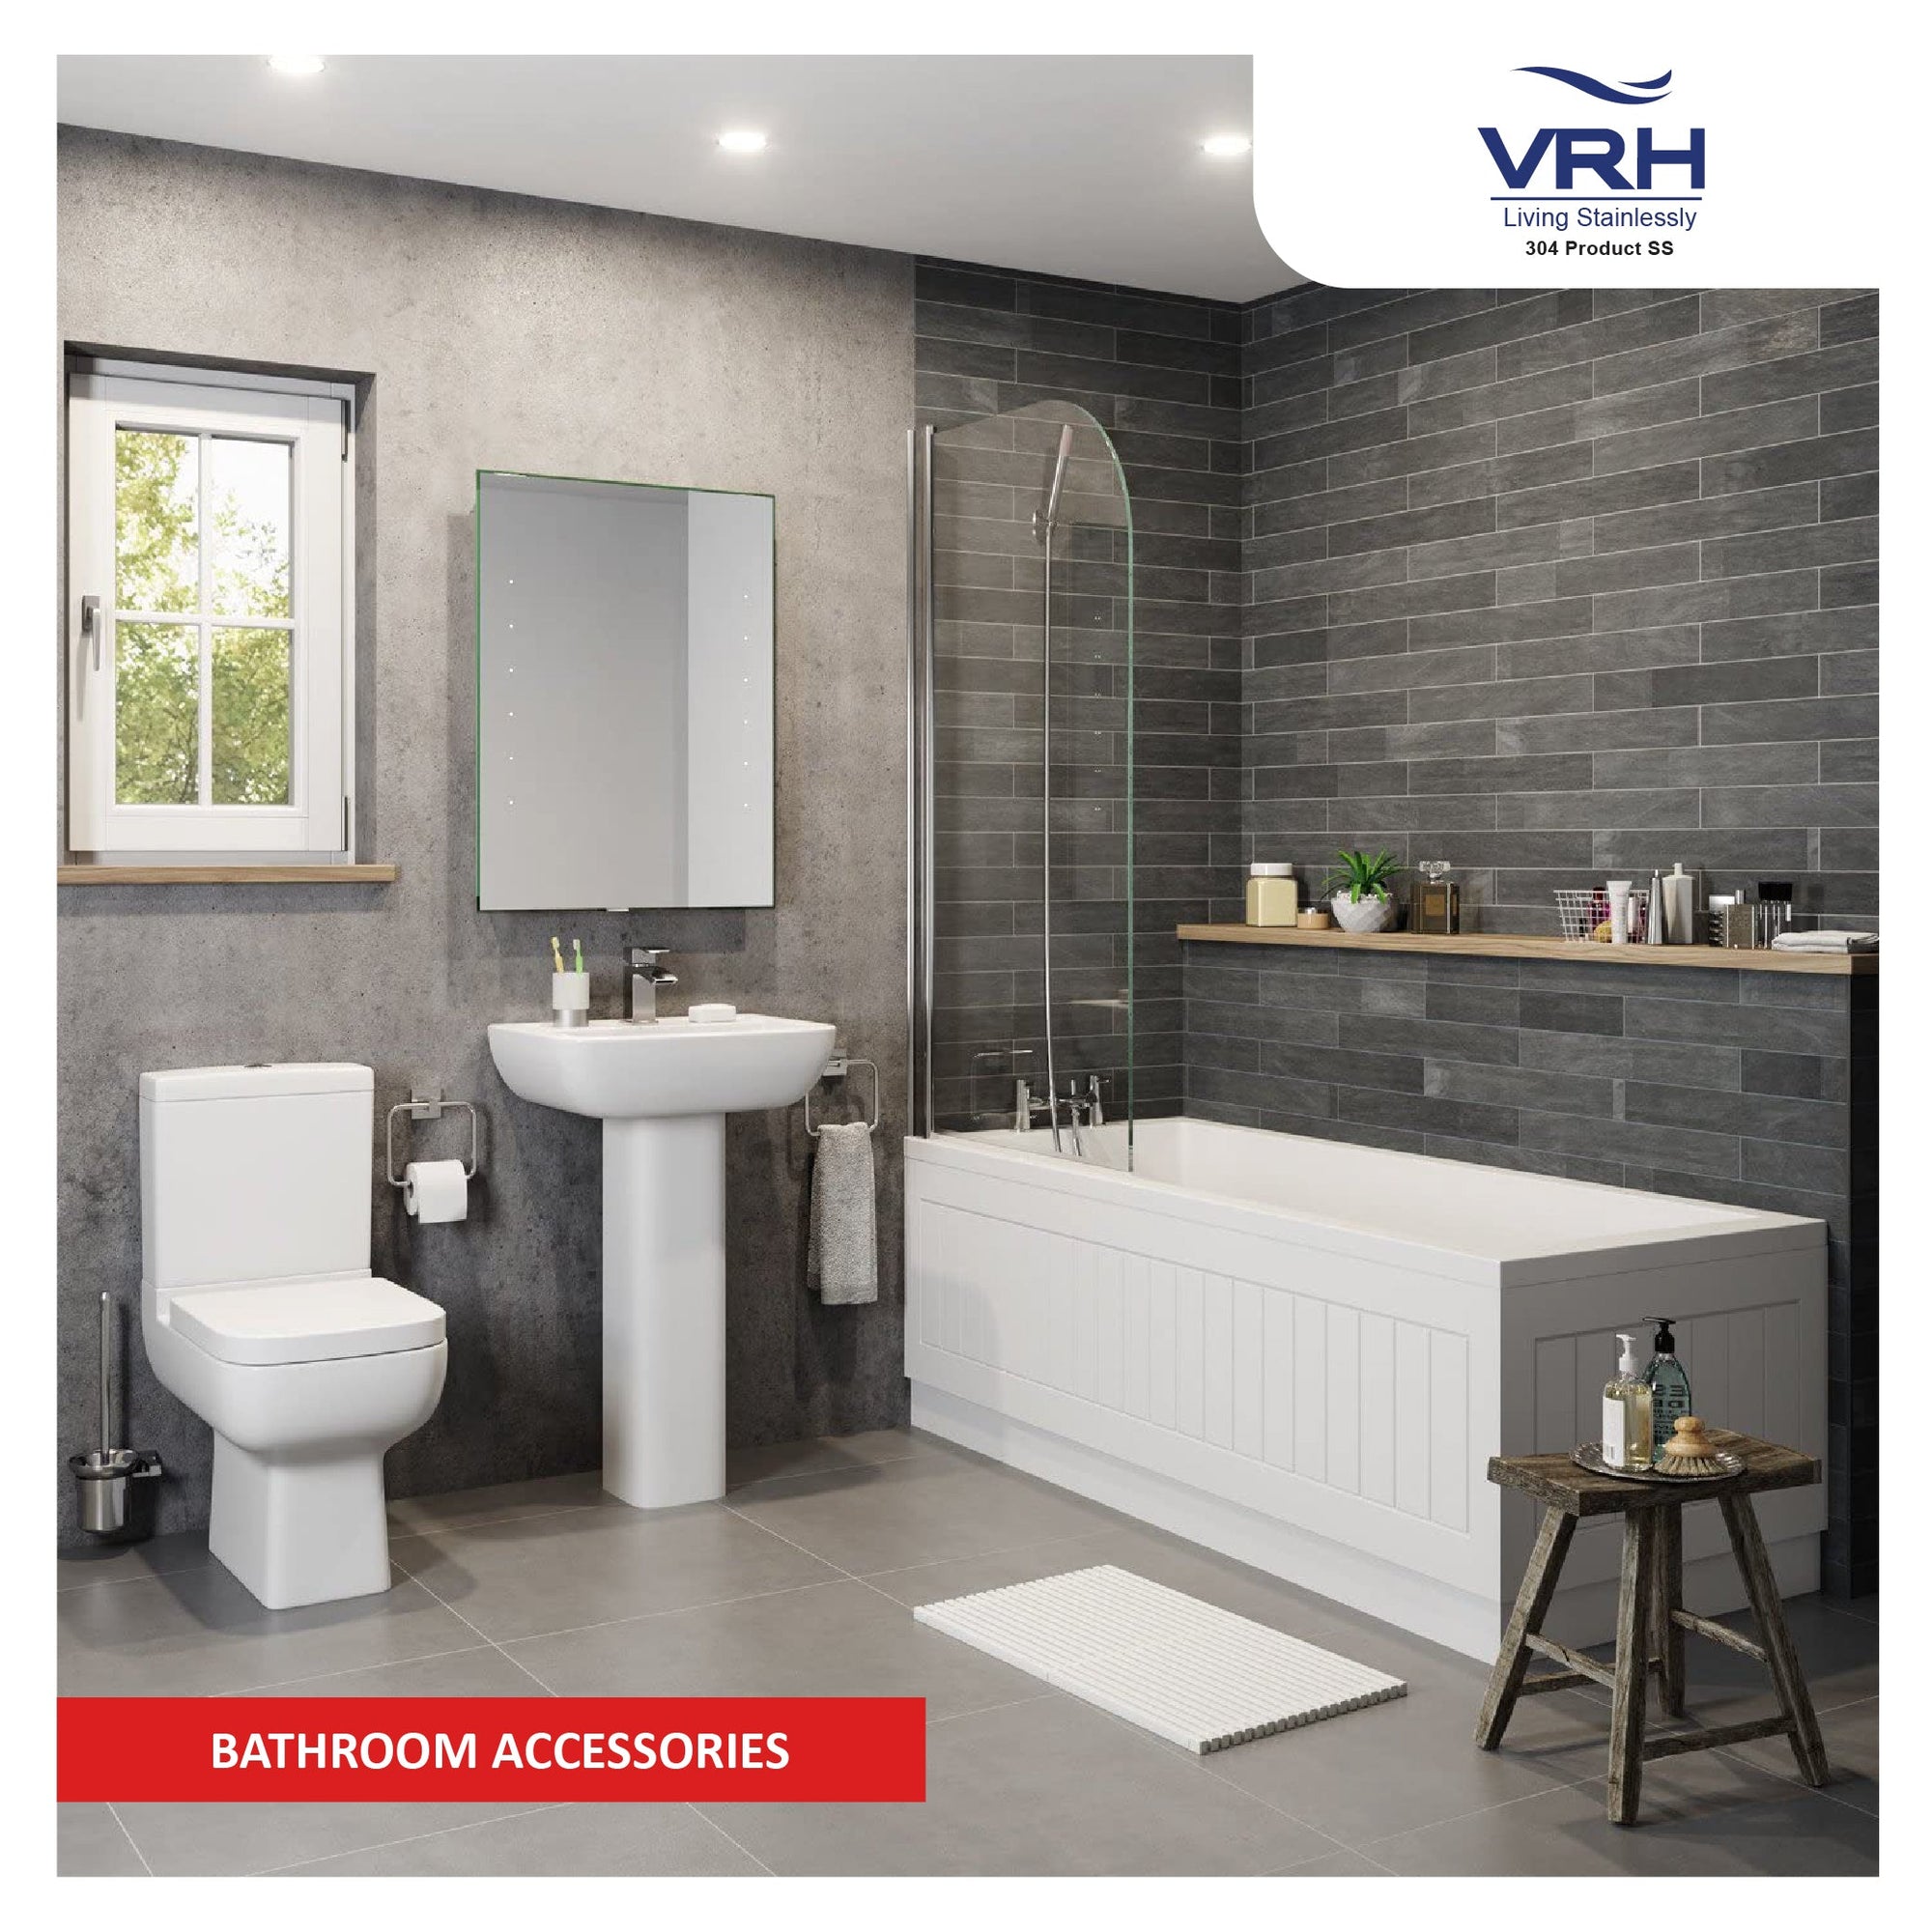 VRH Bathroom Accessories - Elevate Your Bathroom Decor with Stylish and Functional Products